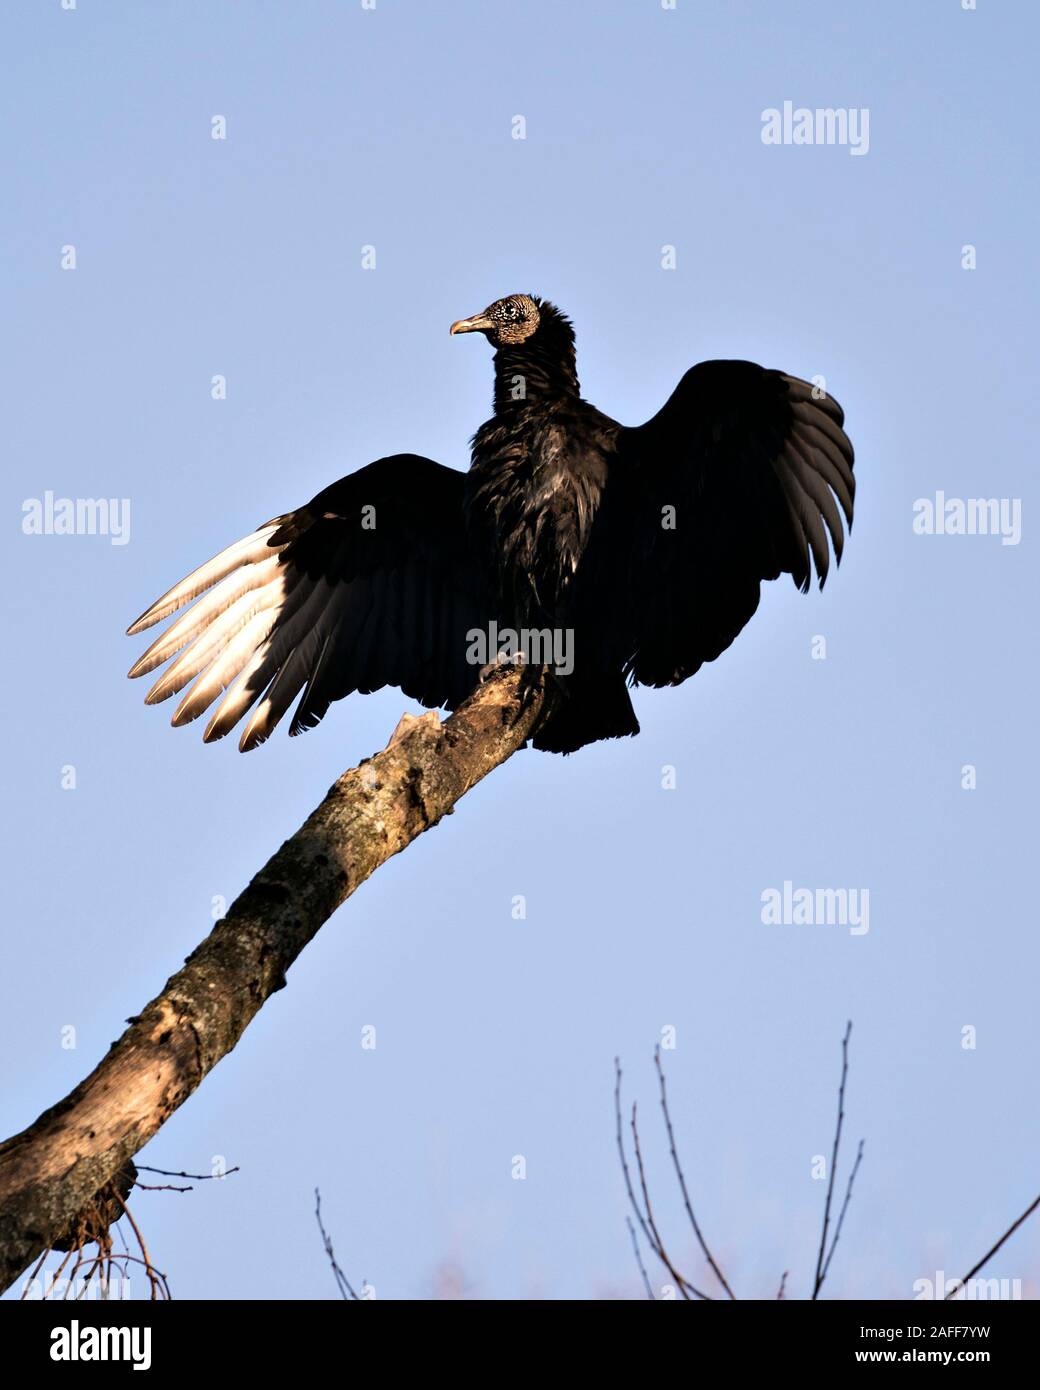 Black Vulture bird close up profile view perched with bleu sky background, displaying head, eye, beak and black plumage in its environment and surroun Stock Photo